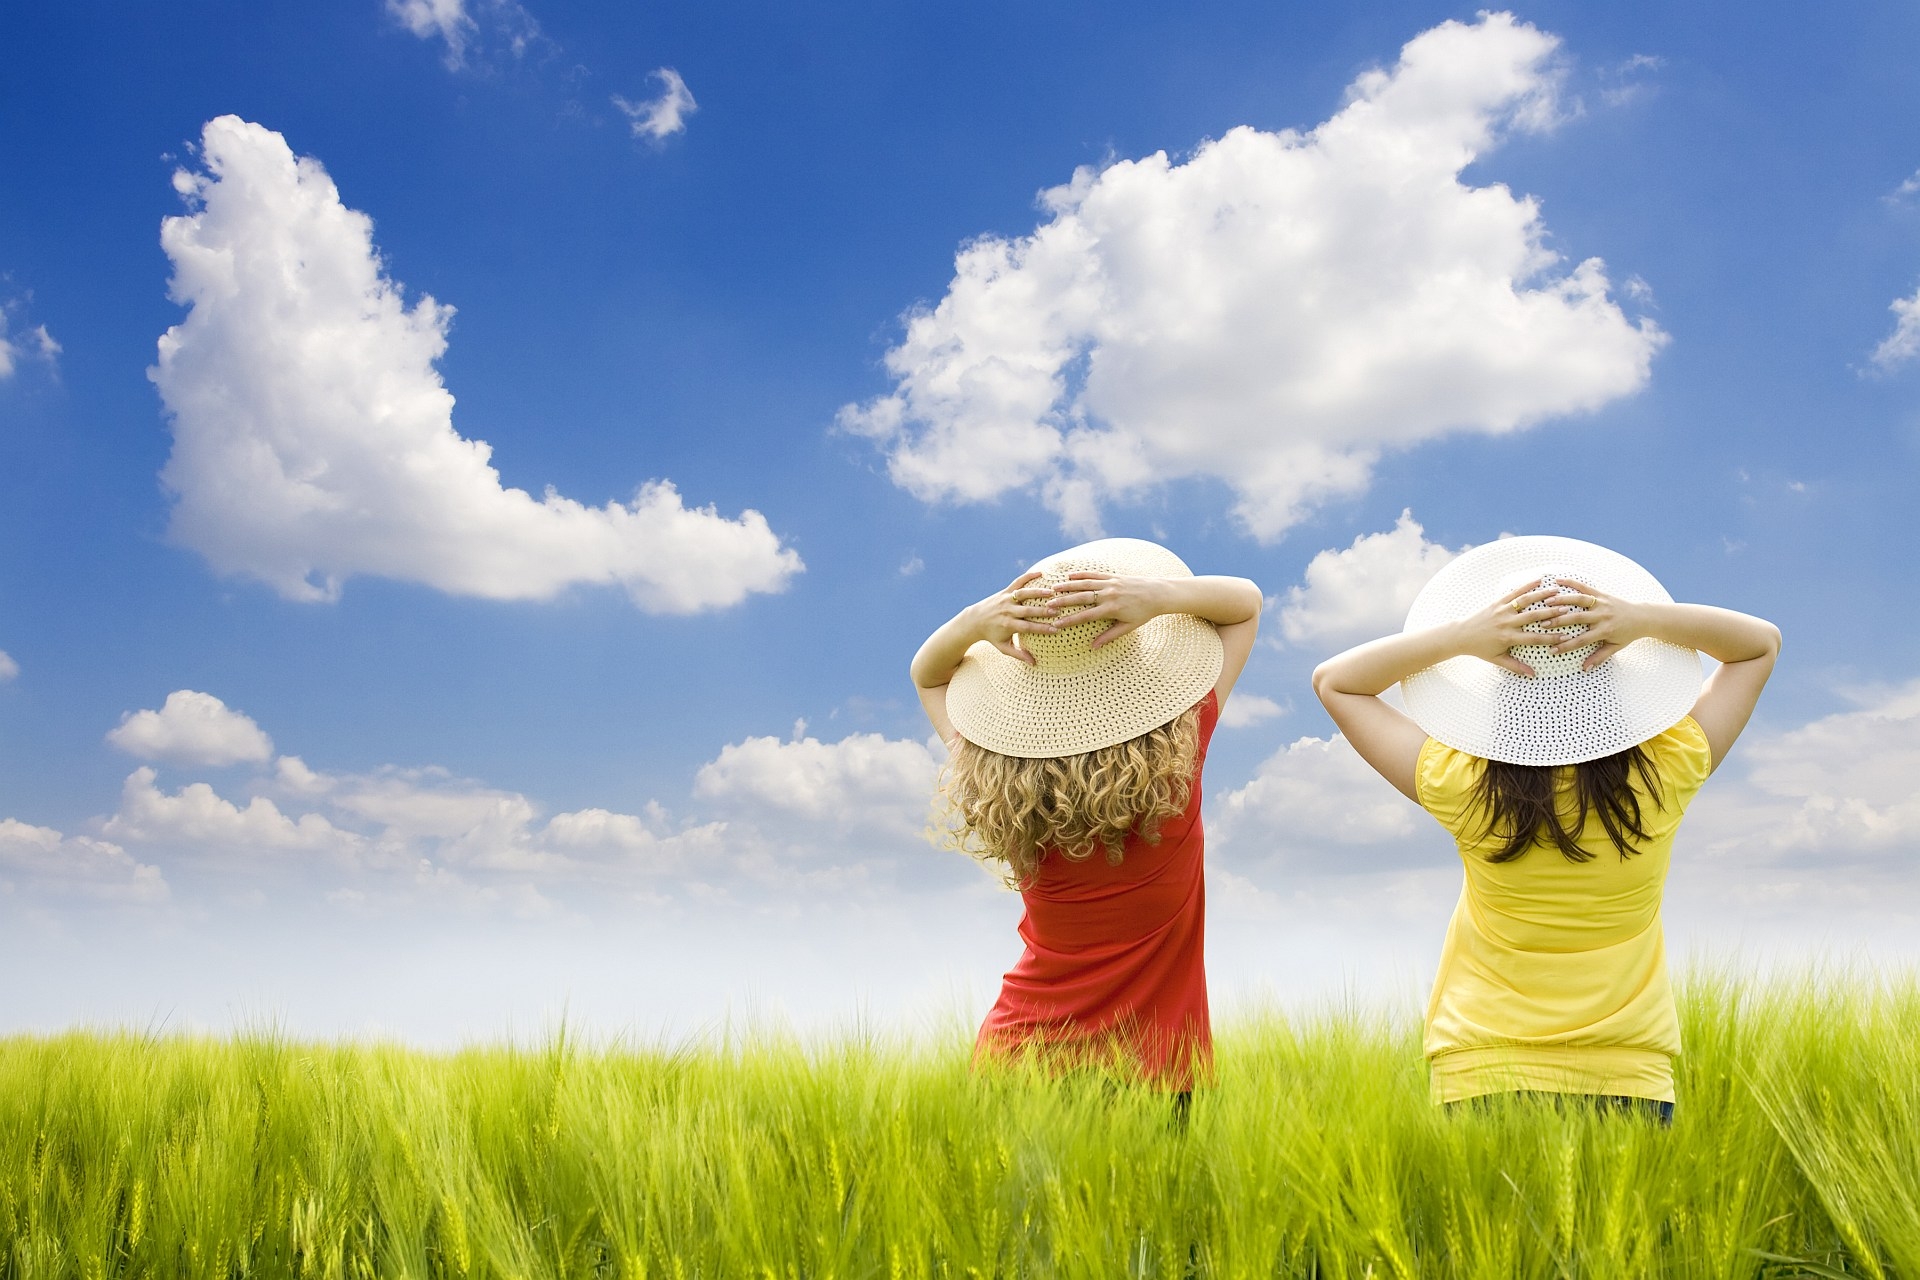 children, girls, grass, sky, miscellanea, miscellaneous, field, hats, air for android